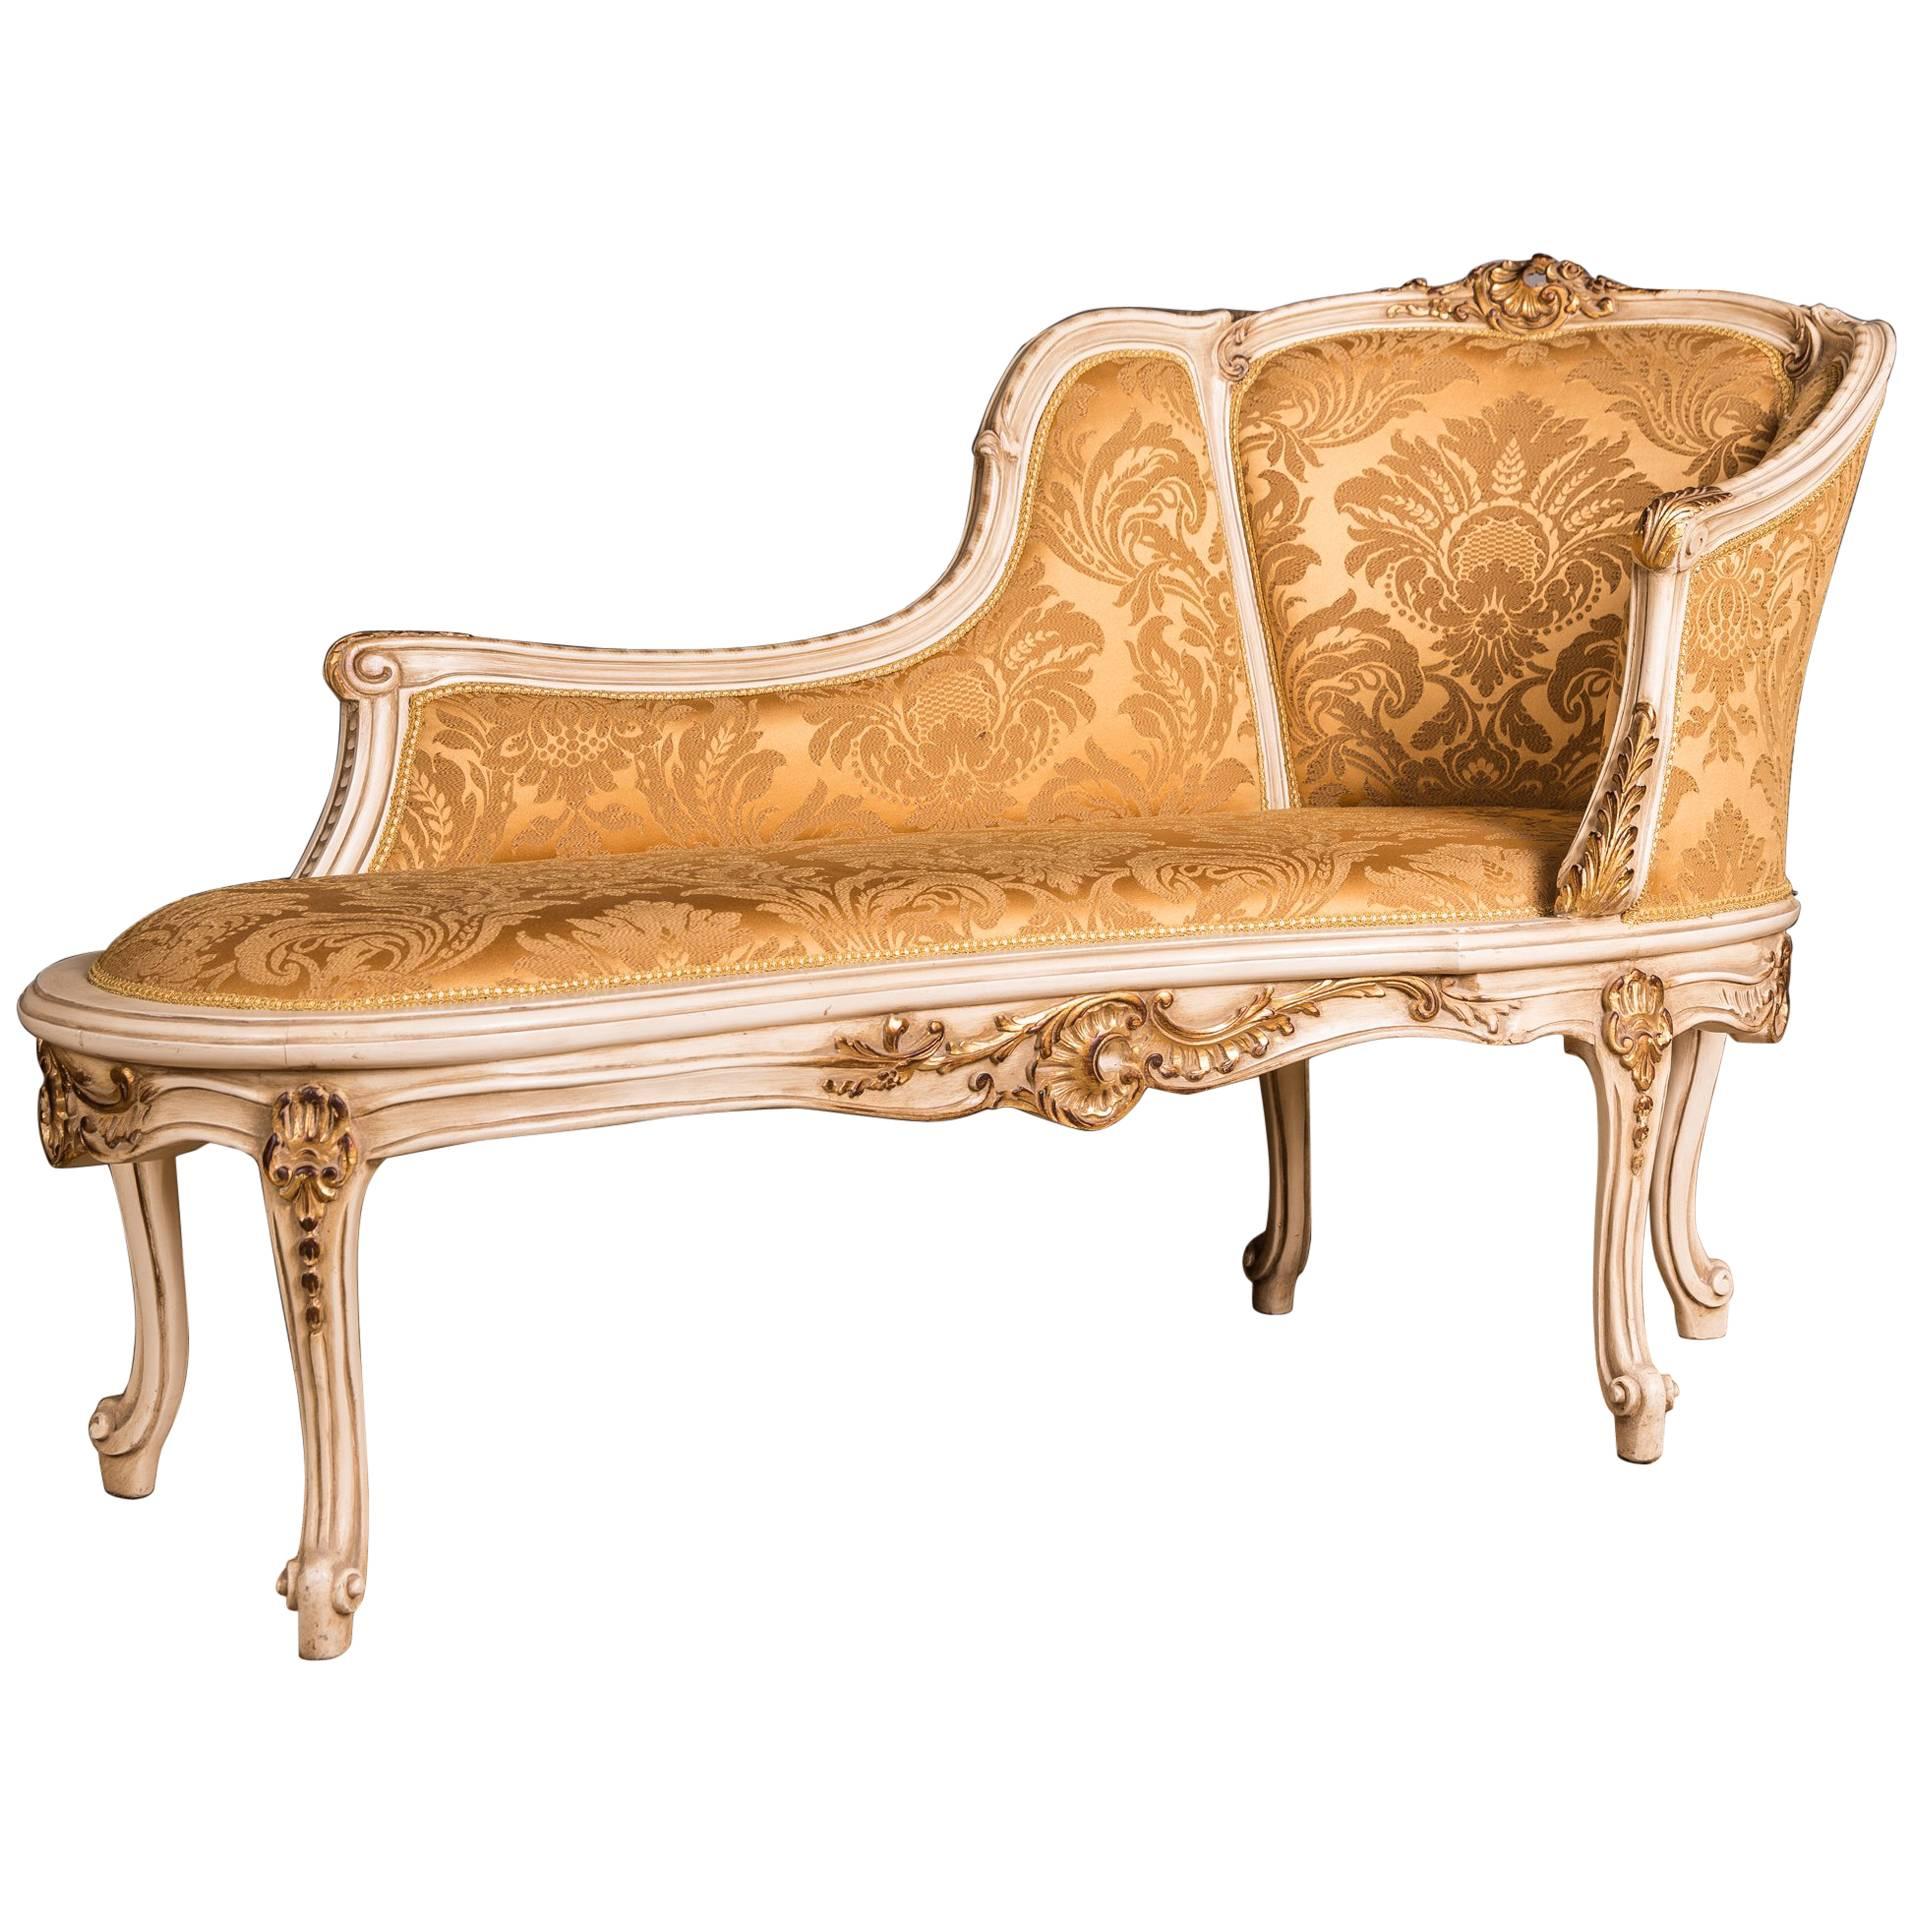 Elegant French Chaise Longue in Louis Quinze Style